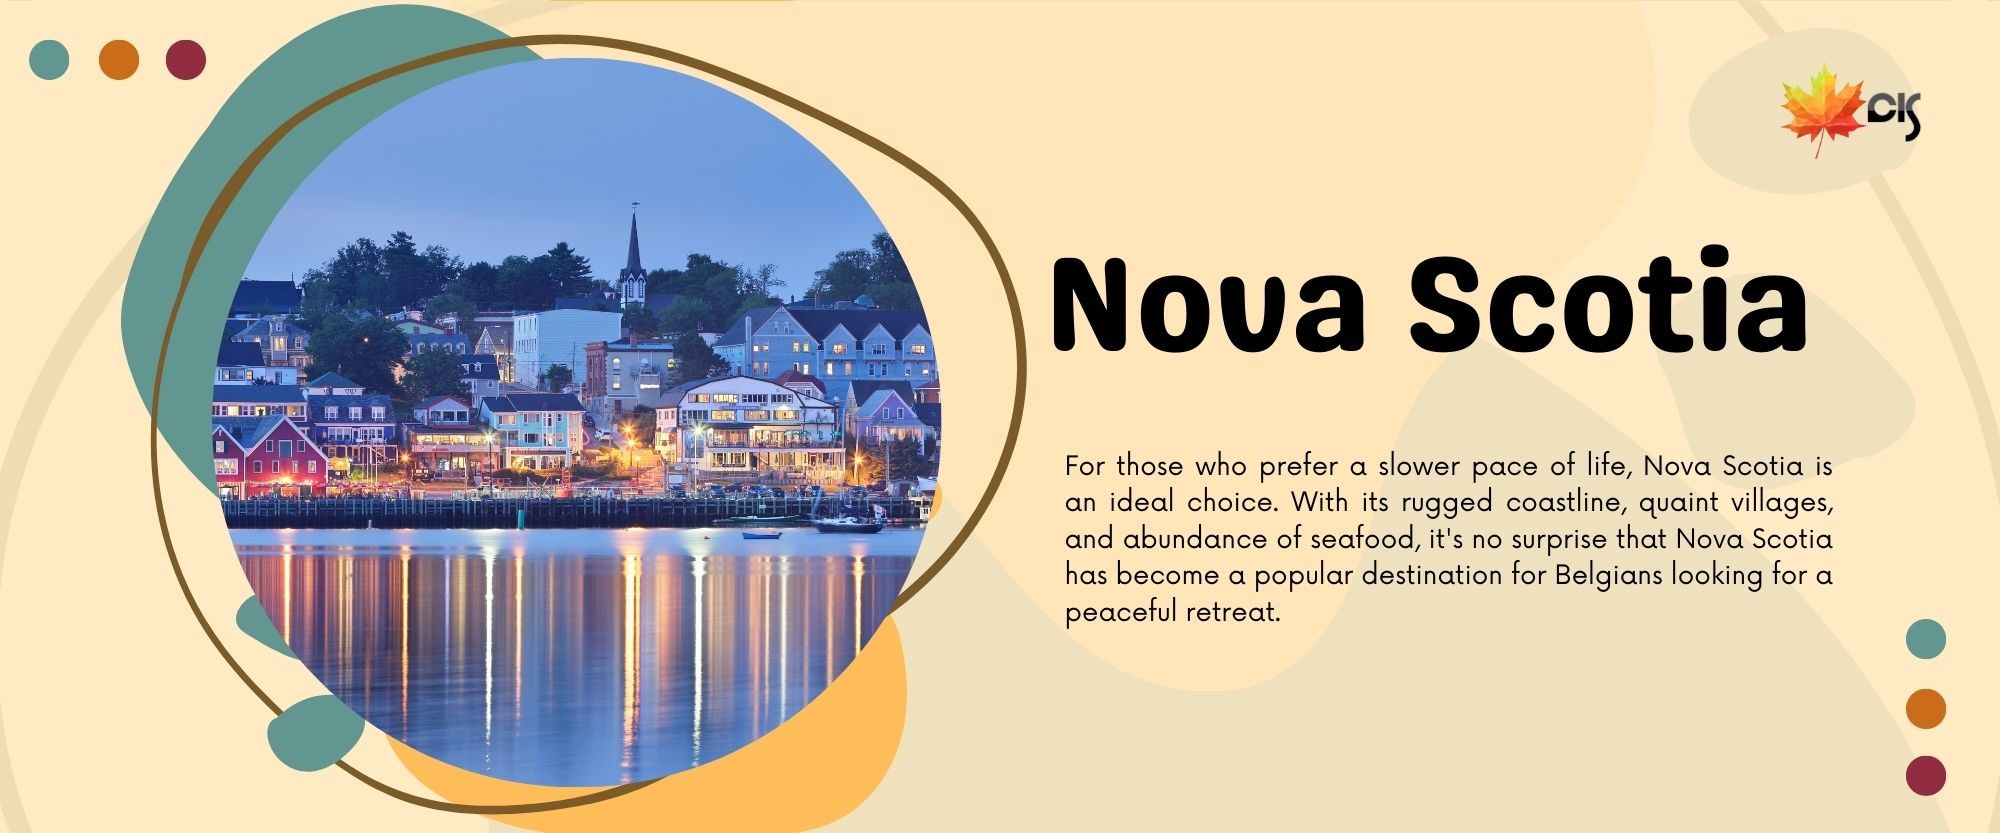 For those who prefer a slower pace of life, Nova Scotia is an ideal choice. With its rugged coastline, quaint villages, and abundance of seafood, it's no surprise that Nova Scotia has become a popular destination for Belgians looking for a peaceful retreat.